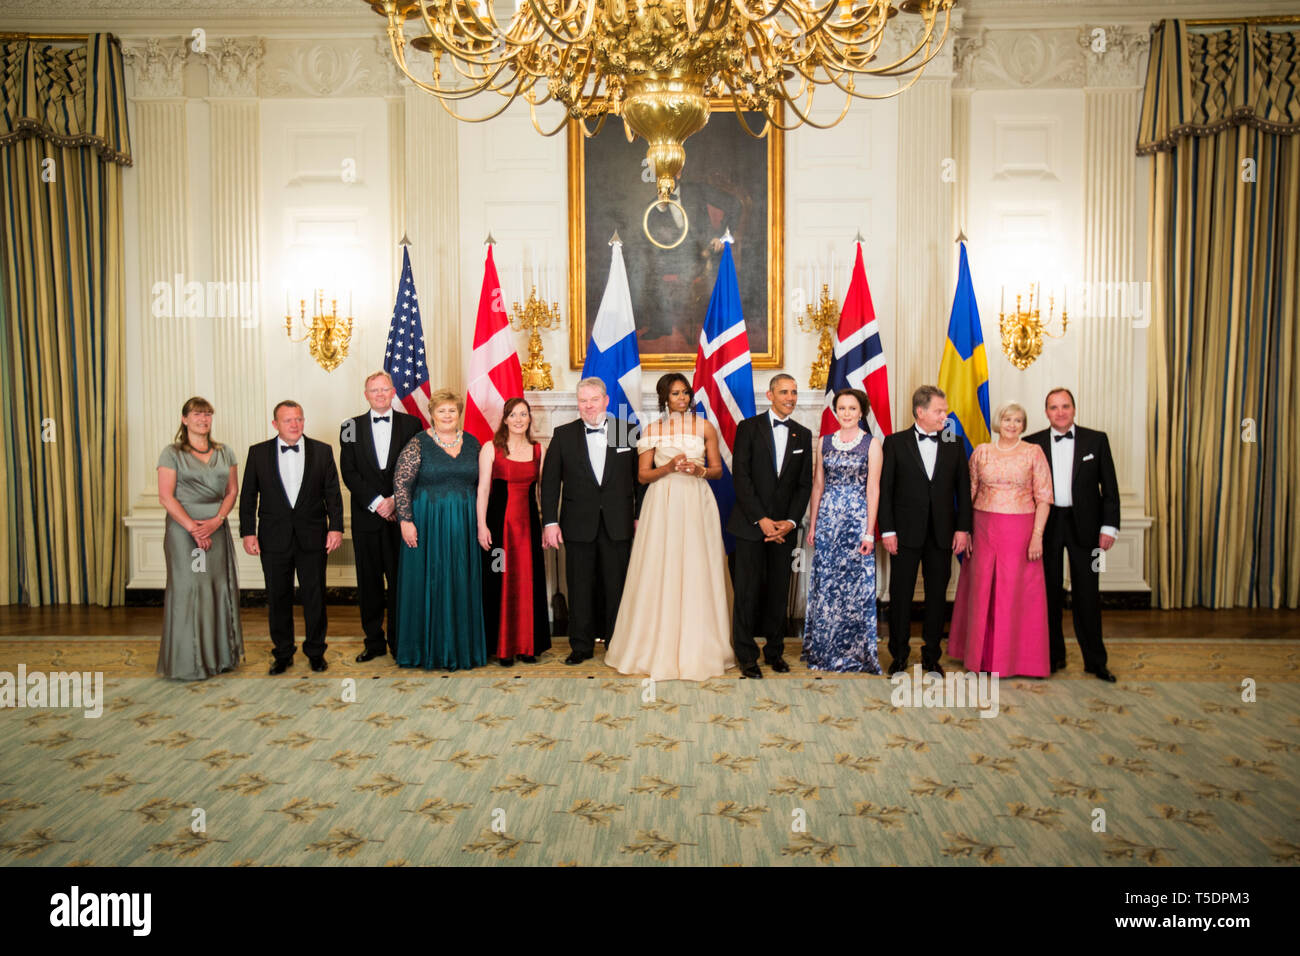 The Nordic Heads of State attends a dinner at the White House, hosted by US President Barack Obama and First Lady Michelle Obama Stock Photo